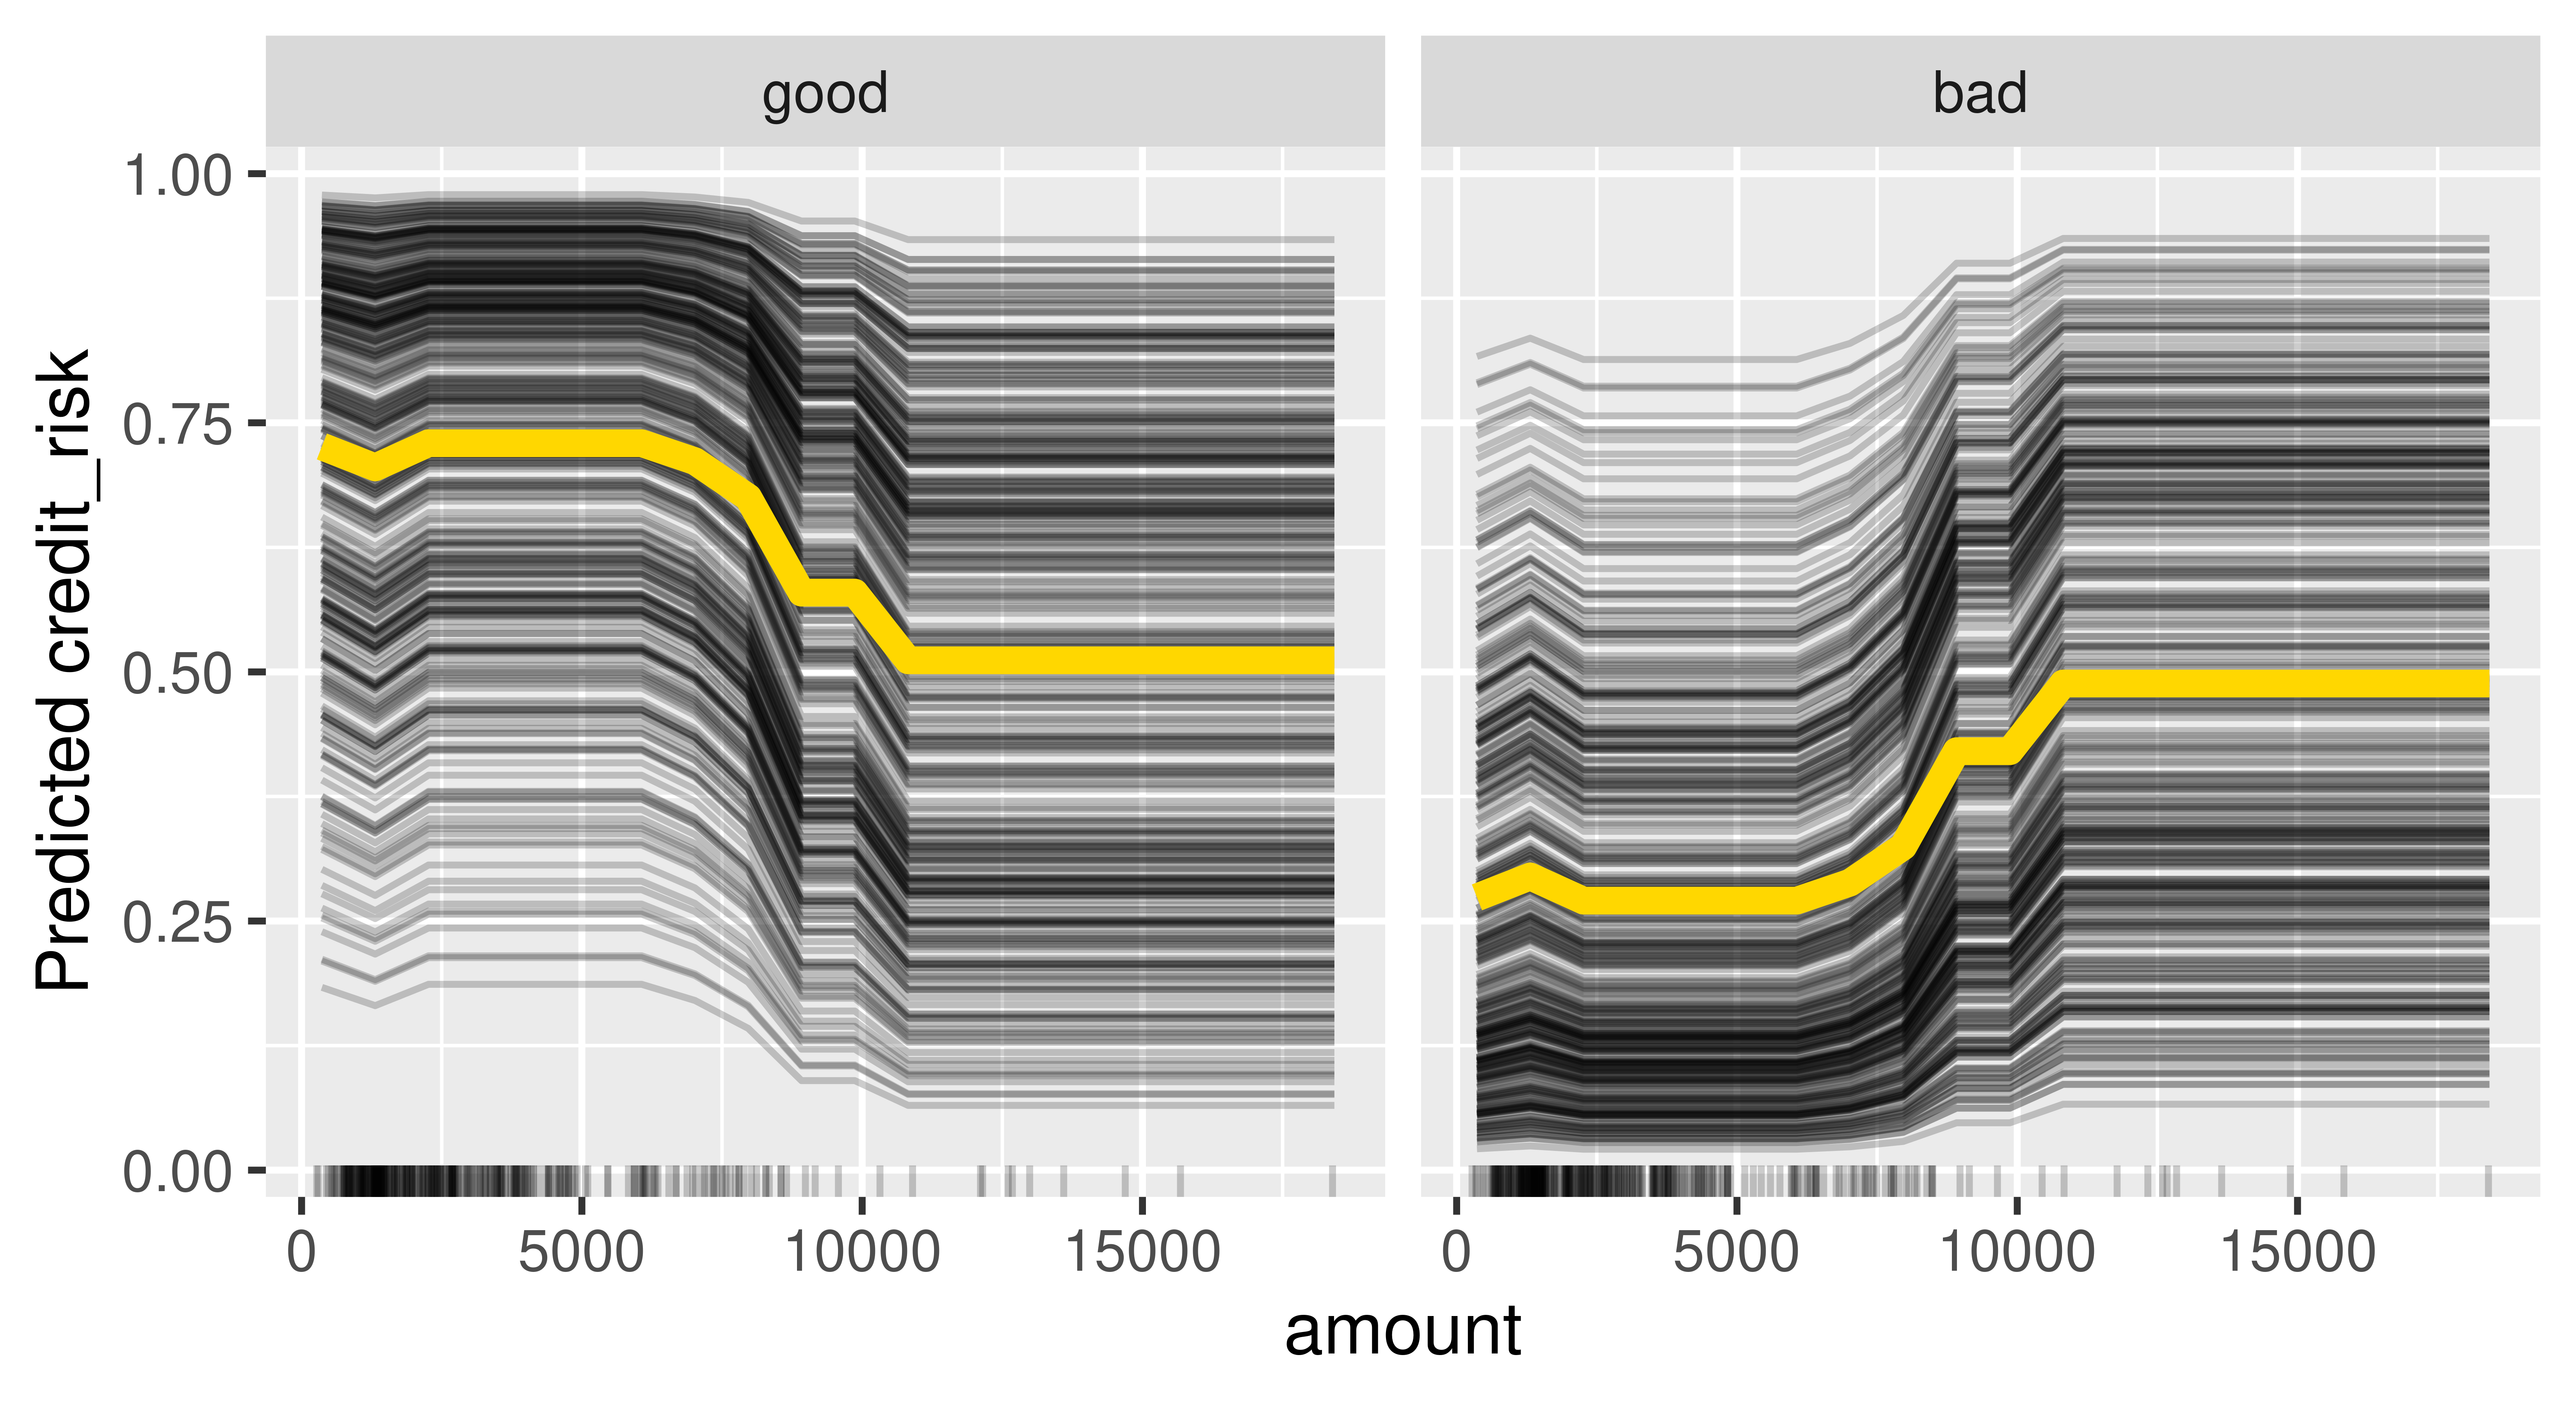 Two plots are visualized side-by-side. The x-axis for both says 'amount' and ranges from 0 to around 16000. The y-axis for both says 'Predicted credit_risk' and ranges from 0 to 1. The left plot is captioned 'good' and shows many thin black curves that are roughly parallel and slowly decrease from 0-10000 and then are roughly flat until the end of the plot. The right plot is captioned 'bad' and shows many thin black curves that are roughly parallel and slowly increase from 0-10000 and then are roughly flat until the end of the plot.